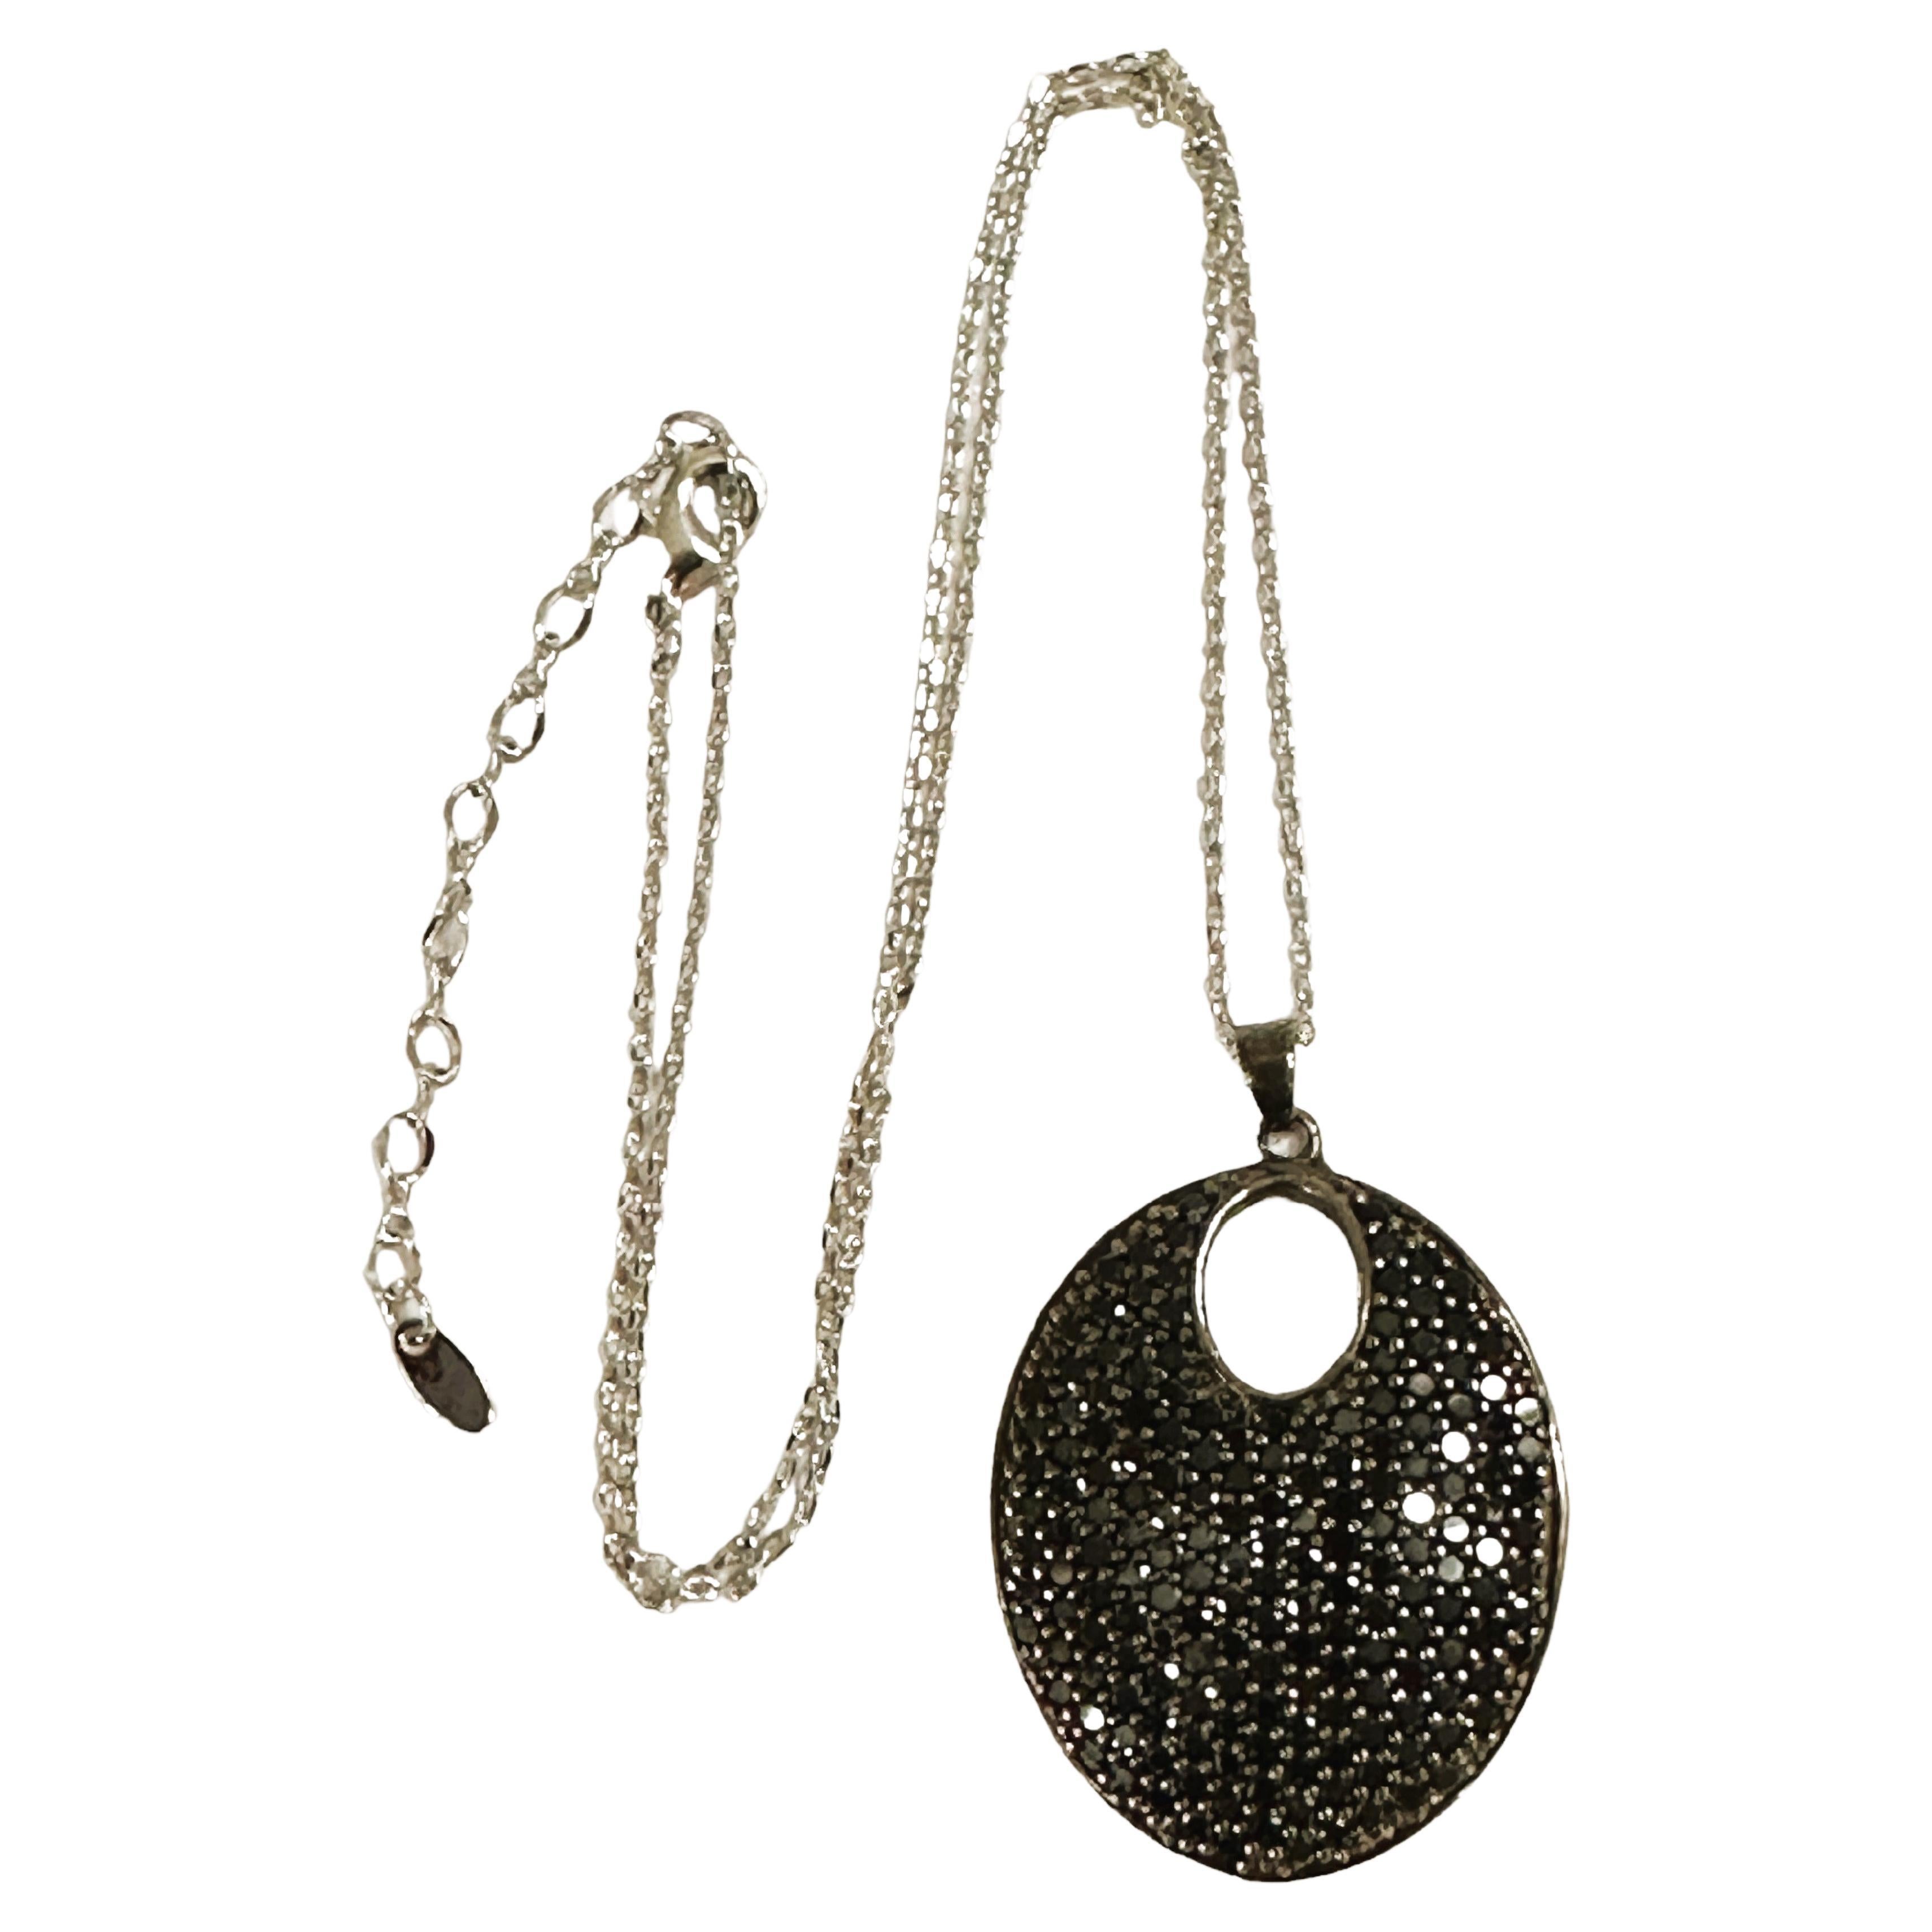 New Sterling Silver Black Sapphire Pave Pendant Necklace